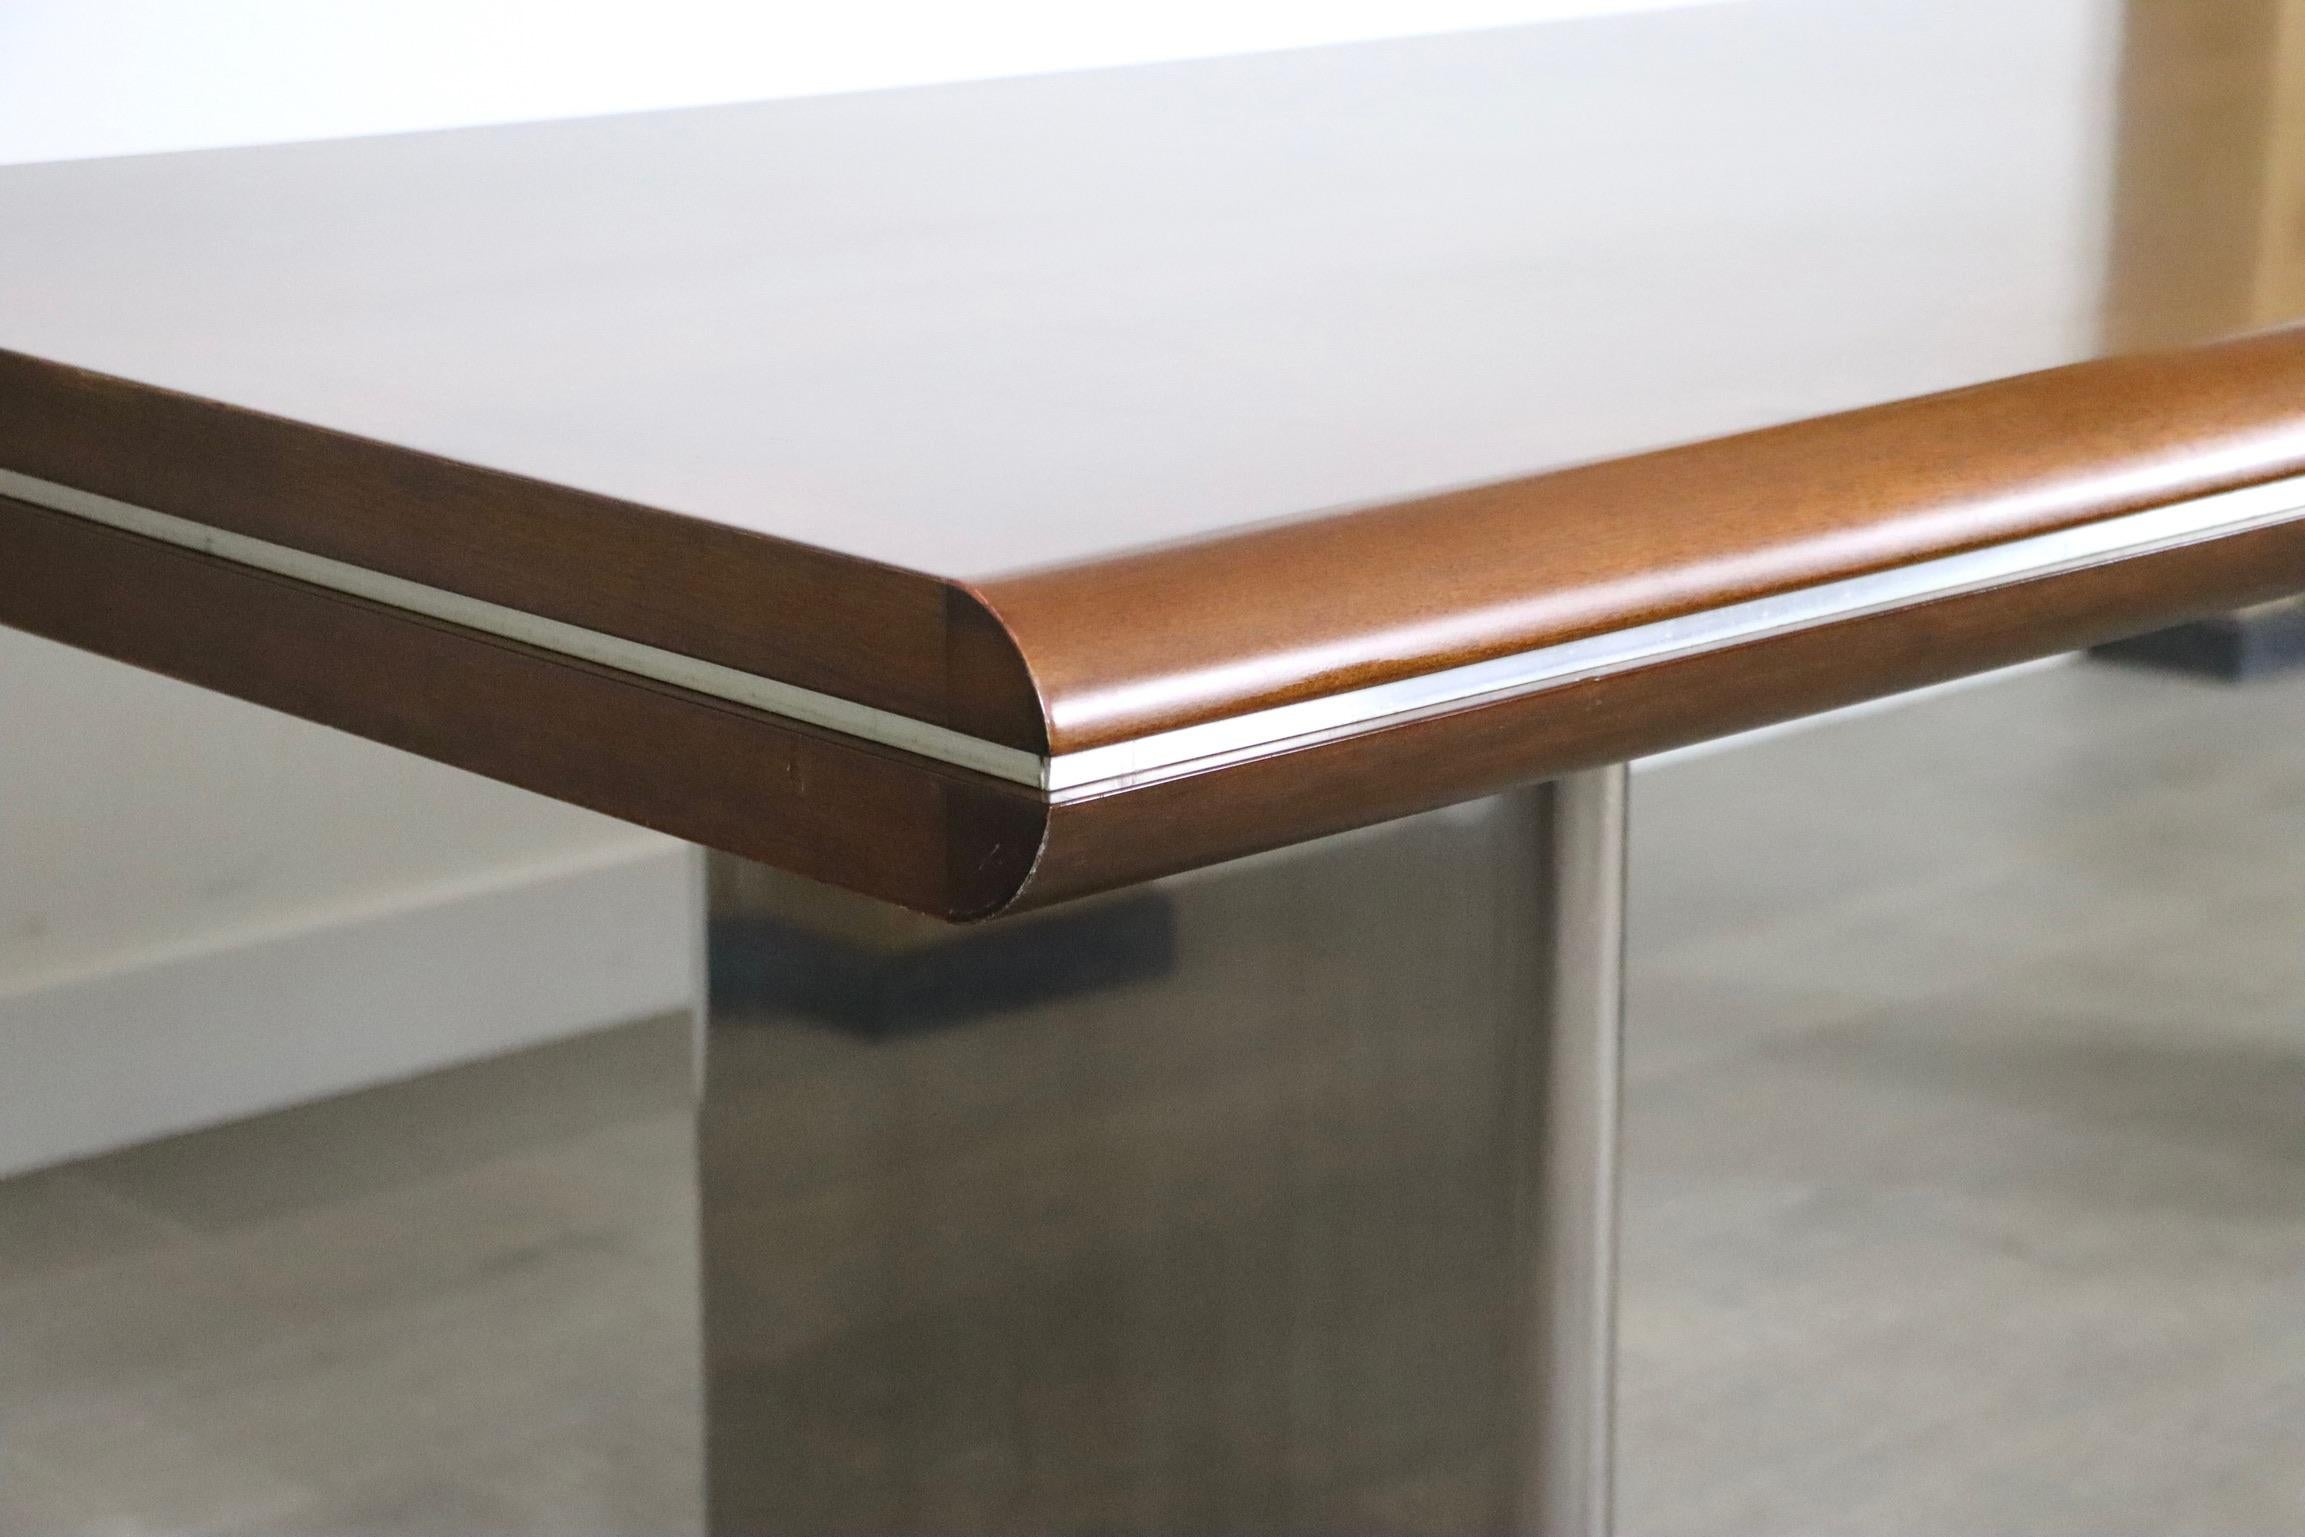 Impressive directors desk designed by Hans von Klier. A striking combination of differently textured materials in two colors makes this desk an intriguing piece. The two t-shaped legs in chromed metal add a highly modern and also architectural